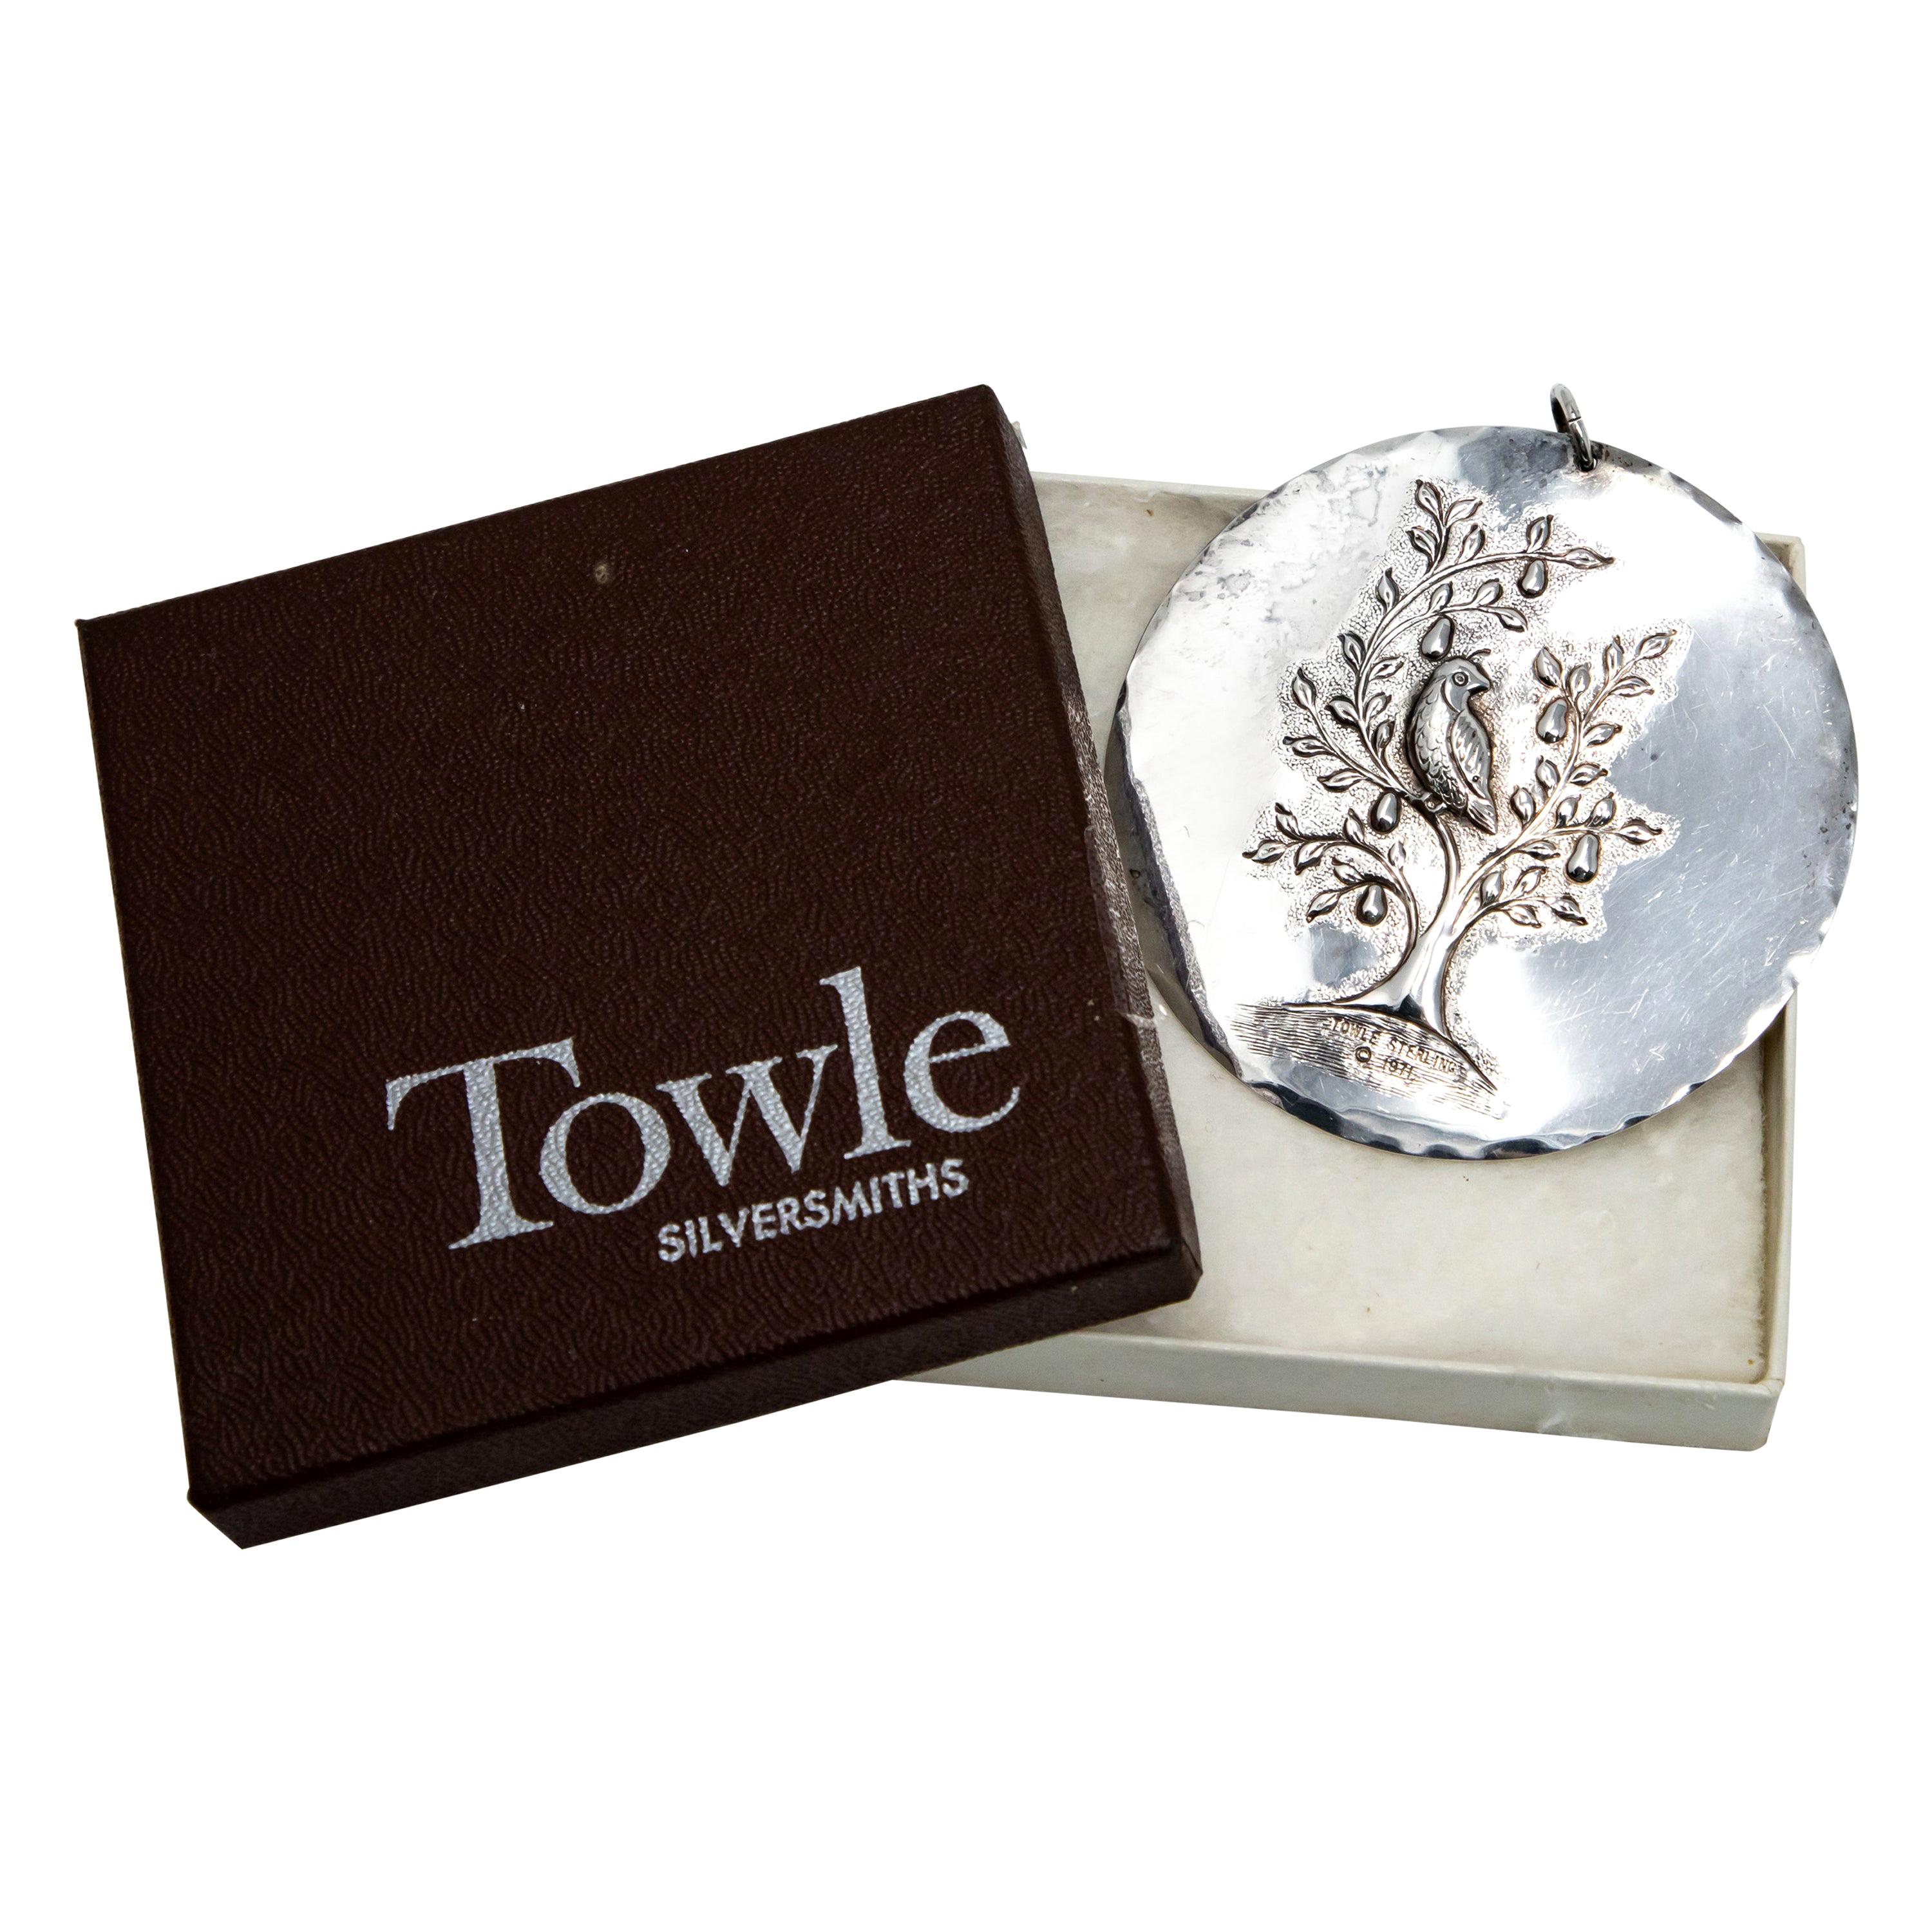 Towle Sterling Ornament Partridge in a Pear Tree with Dove of Peace Box, 1971 For Sale